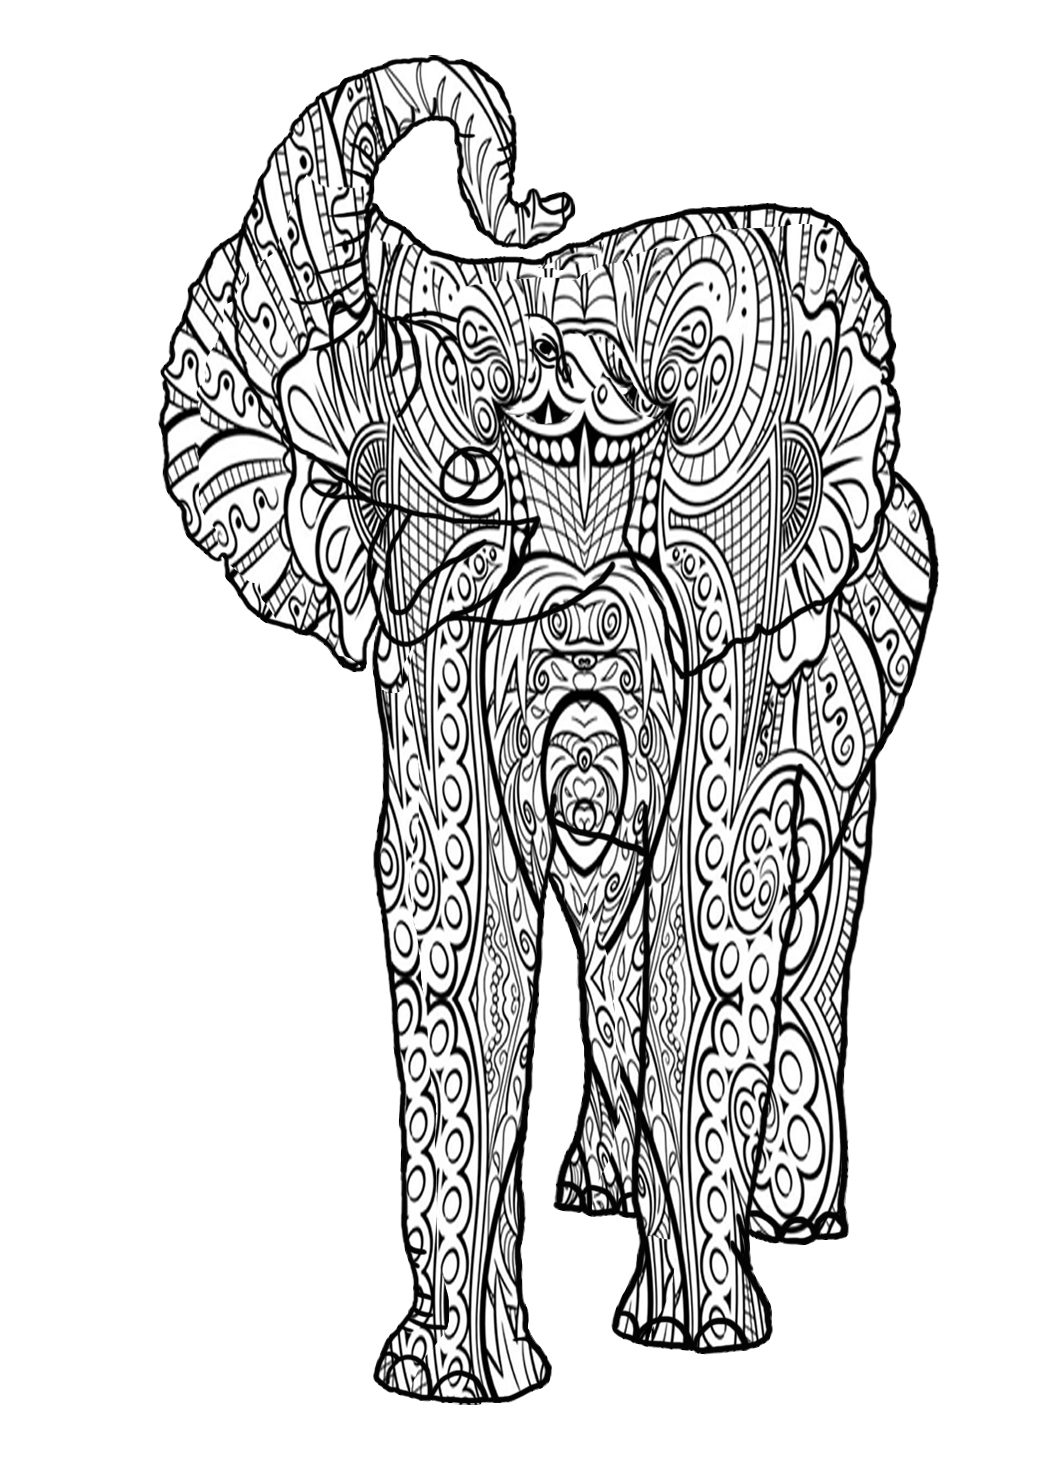 jumbo patterned for coloring